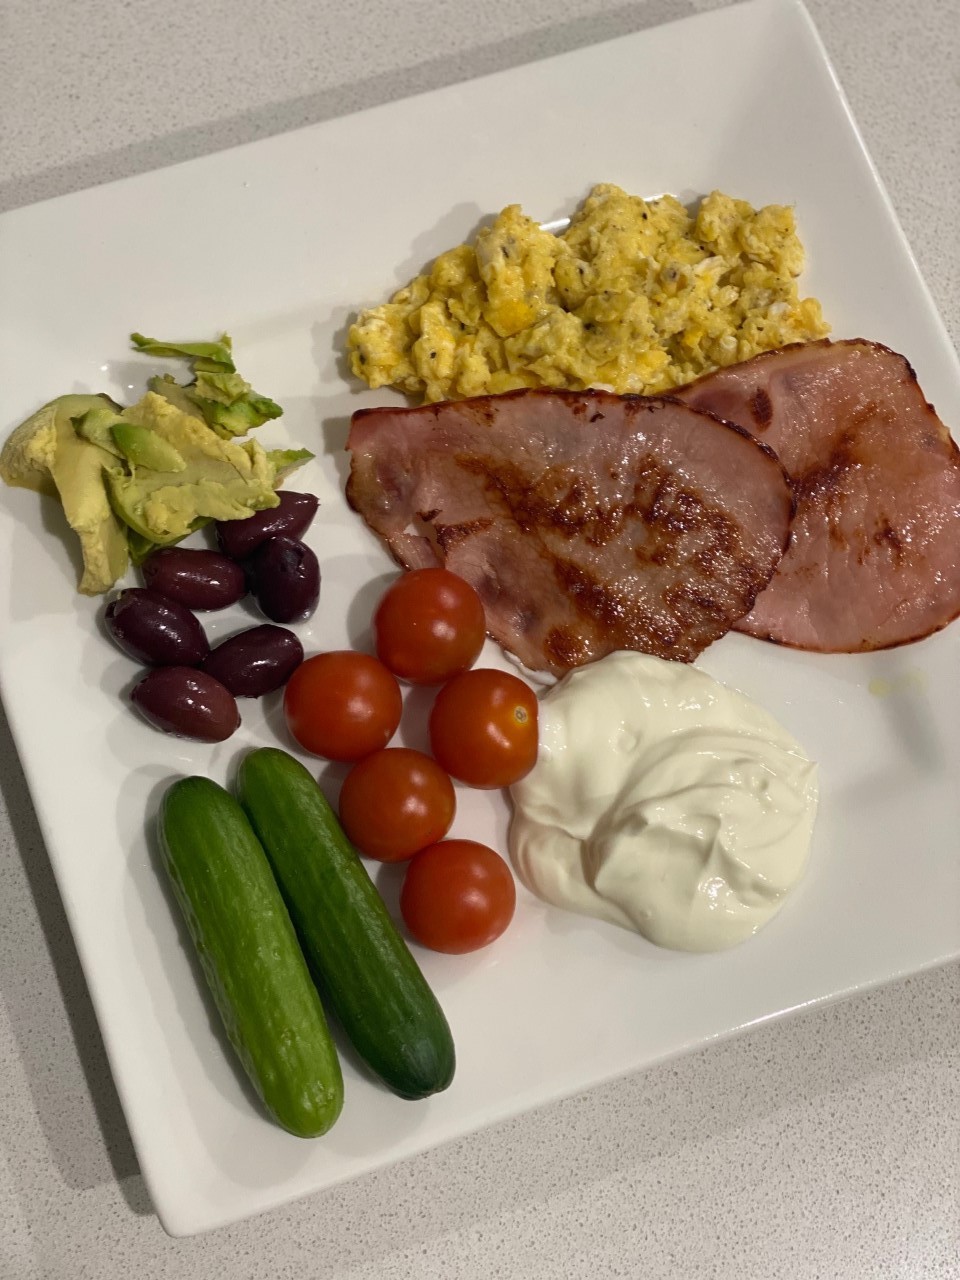 Name: Mia. Shortlist. My breakfast is a plate of champions. It has yogurt, eggs, cucumber, avocados, olives and tomato.
            Yogurt is dairy that keeps you healthy and makes you strong. It can protect your teeth and bones and help prevent digestive problems. Olives also help keep your bones strong and they taste so yummy. Eggs and Bacon are protein and helps make your heart stronger. The tomatoes and cucumbers are important vegetables that fill your body with good nutrients and keeps you hydrated. Finally, avocados are great and help lower cholesterol and gives you important vitamins for your body.